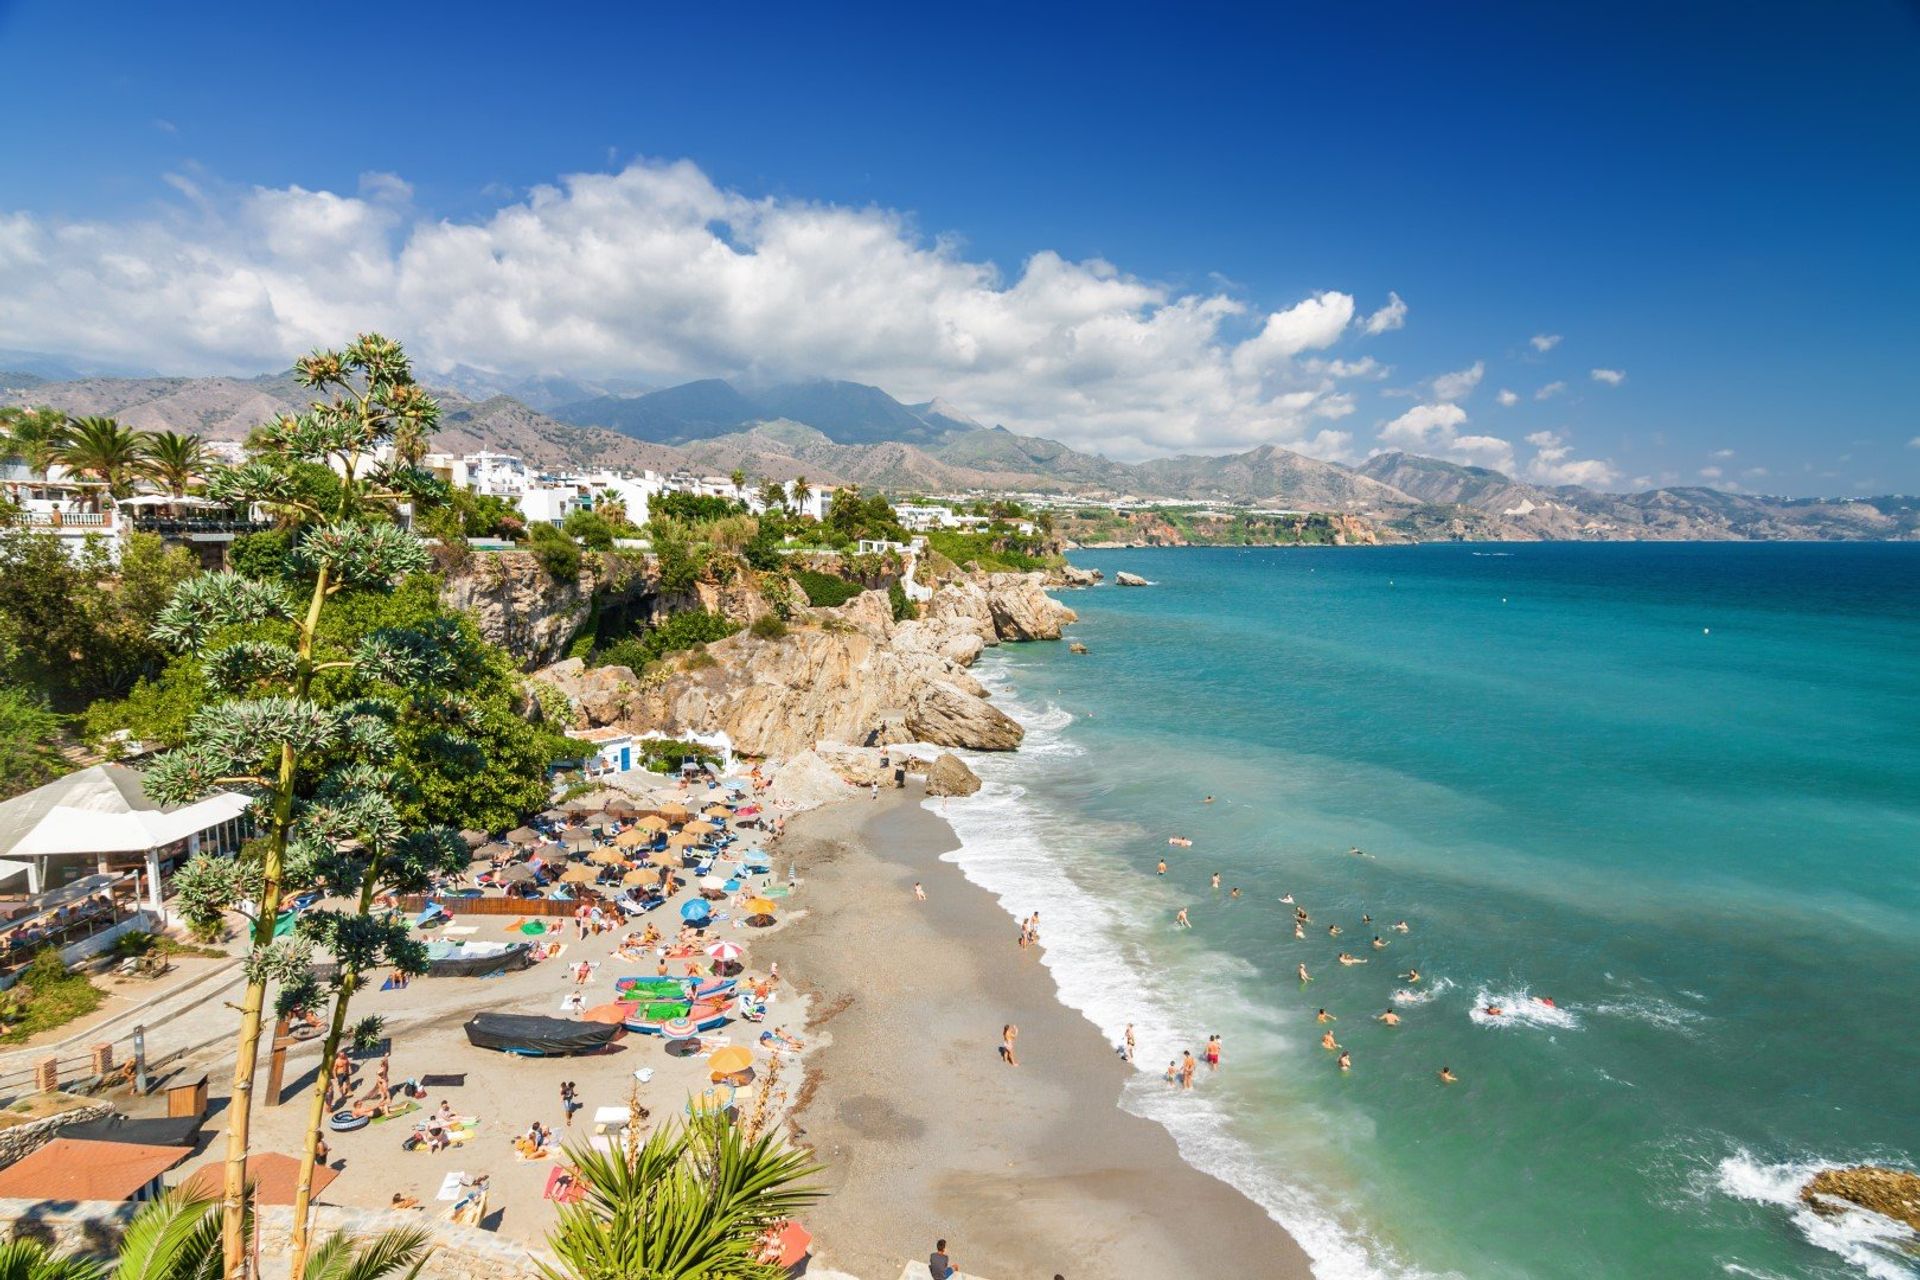  From The Balcón de Europa in Nerja, take in beautiful panoramic views of the Mediterranean and its dark sand beaches